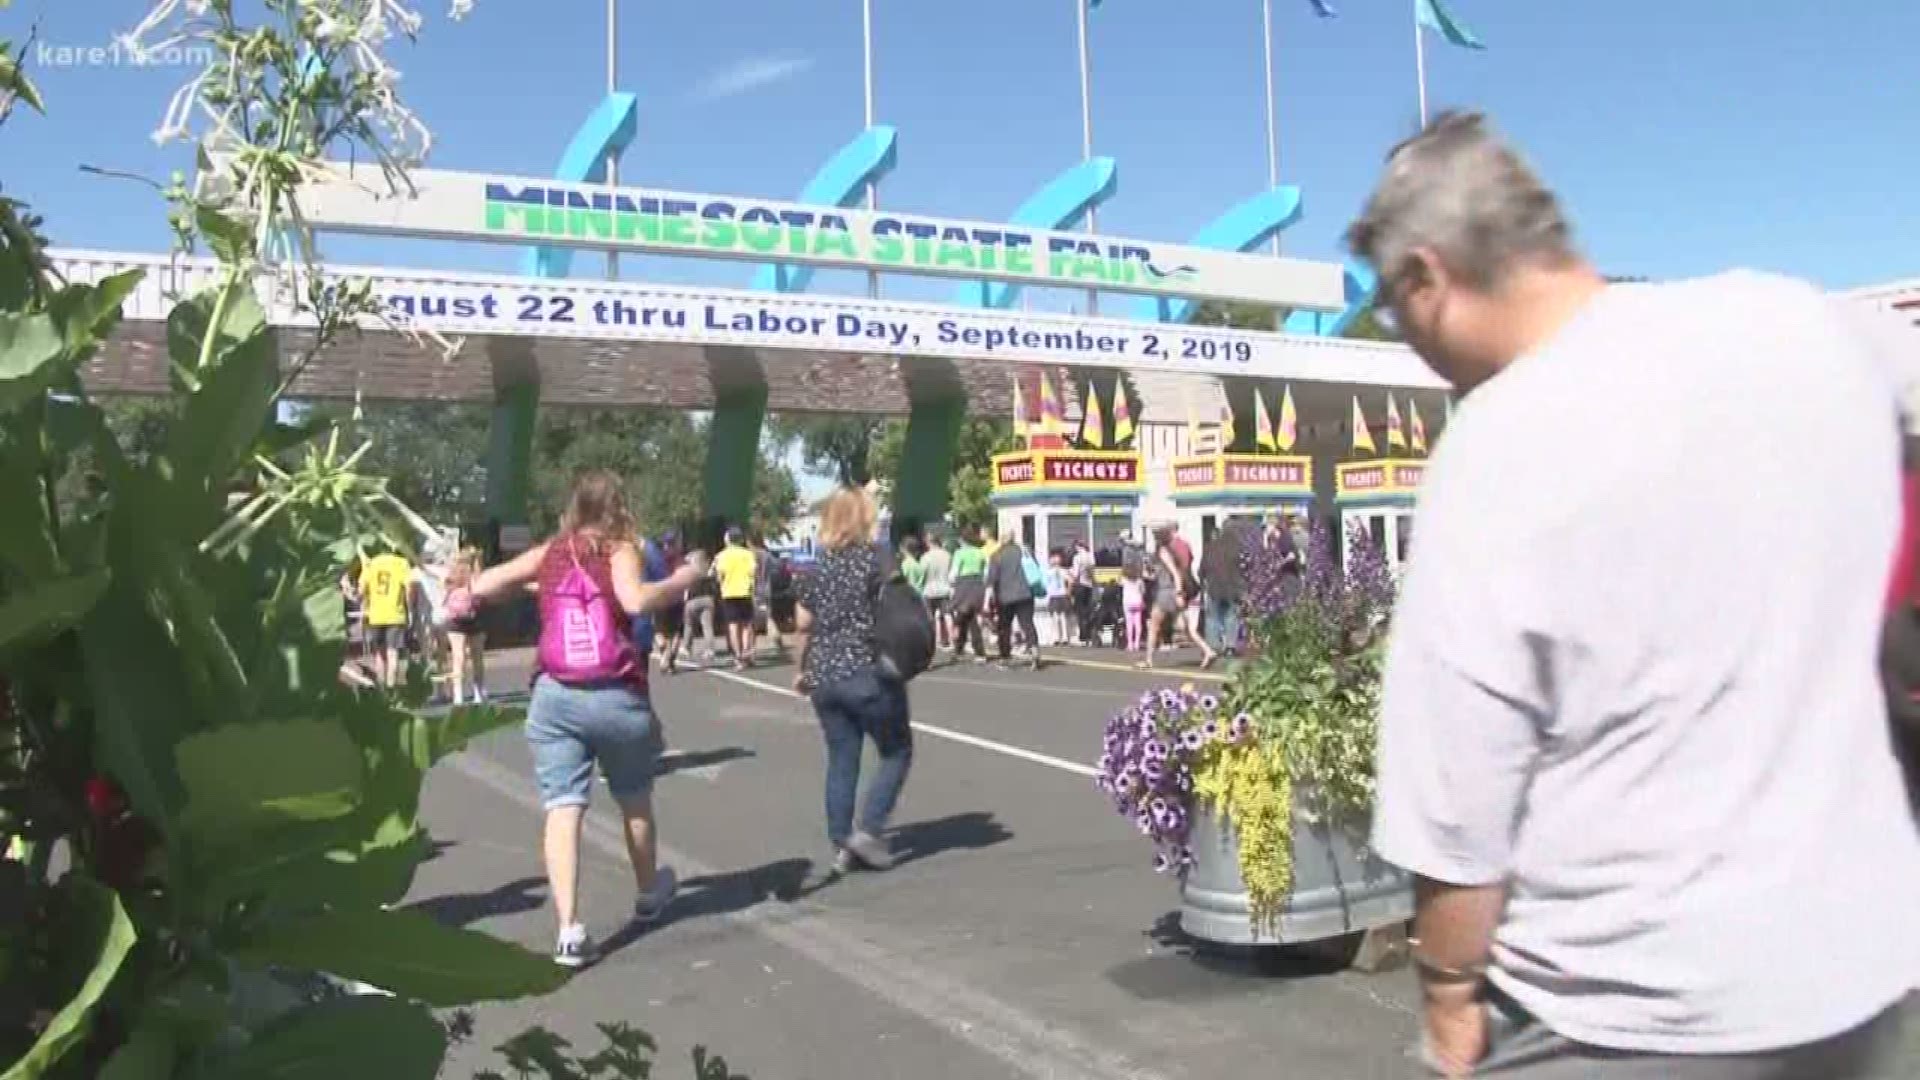 So far this year at the State Fair, crowds have broken daily attendance records three times.